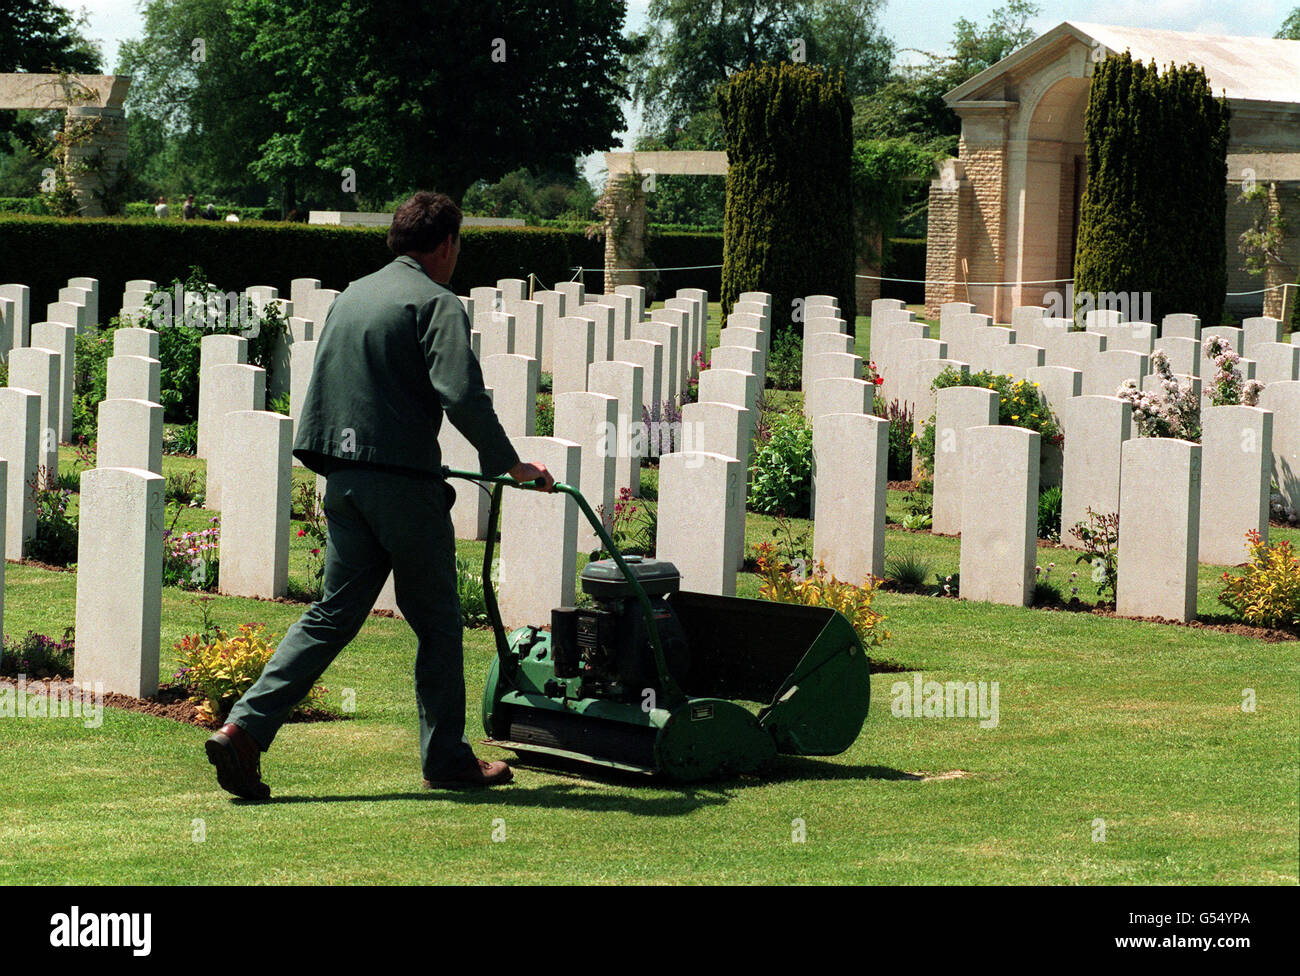 COMMONWEALTH WAR GRAVES: A gardener mows the lawns at the British military cemetery at Bayeux, Normandy. The cemetery will be visited by the Queen on the 50th anniversary of the D-Day Landings of June 1944. Normandy was the scene of fierce fighting between Allied and German forces during the Second World War. * 11/11/2000 gardener mowing the lawns at the British military cemetery at Bayeux, Normandy. Threatened pay cuts for gardeners tending British war graves abroad have been put on hold while a review into allowances is carried out, it was confirmed Saturday 11 November 2000. The move is a Stock Photo